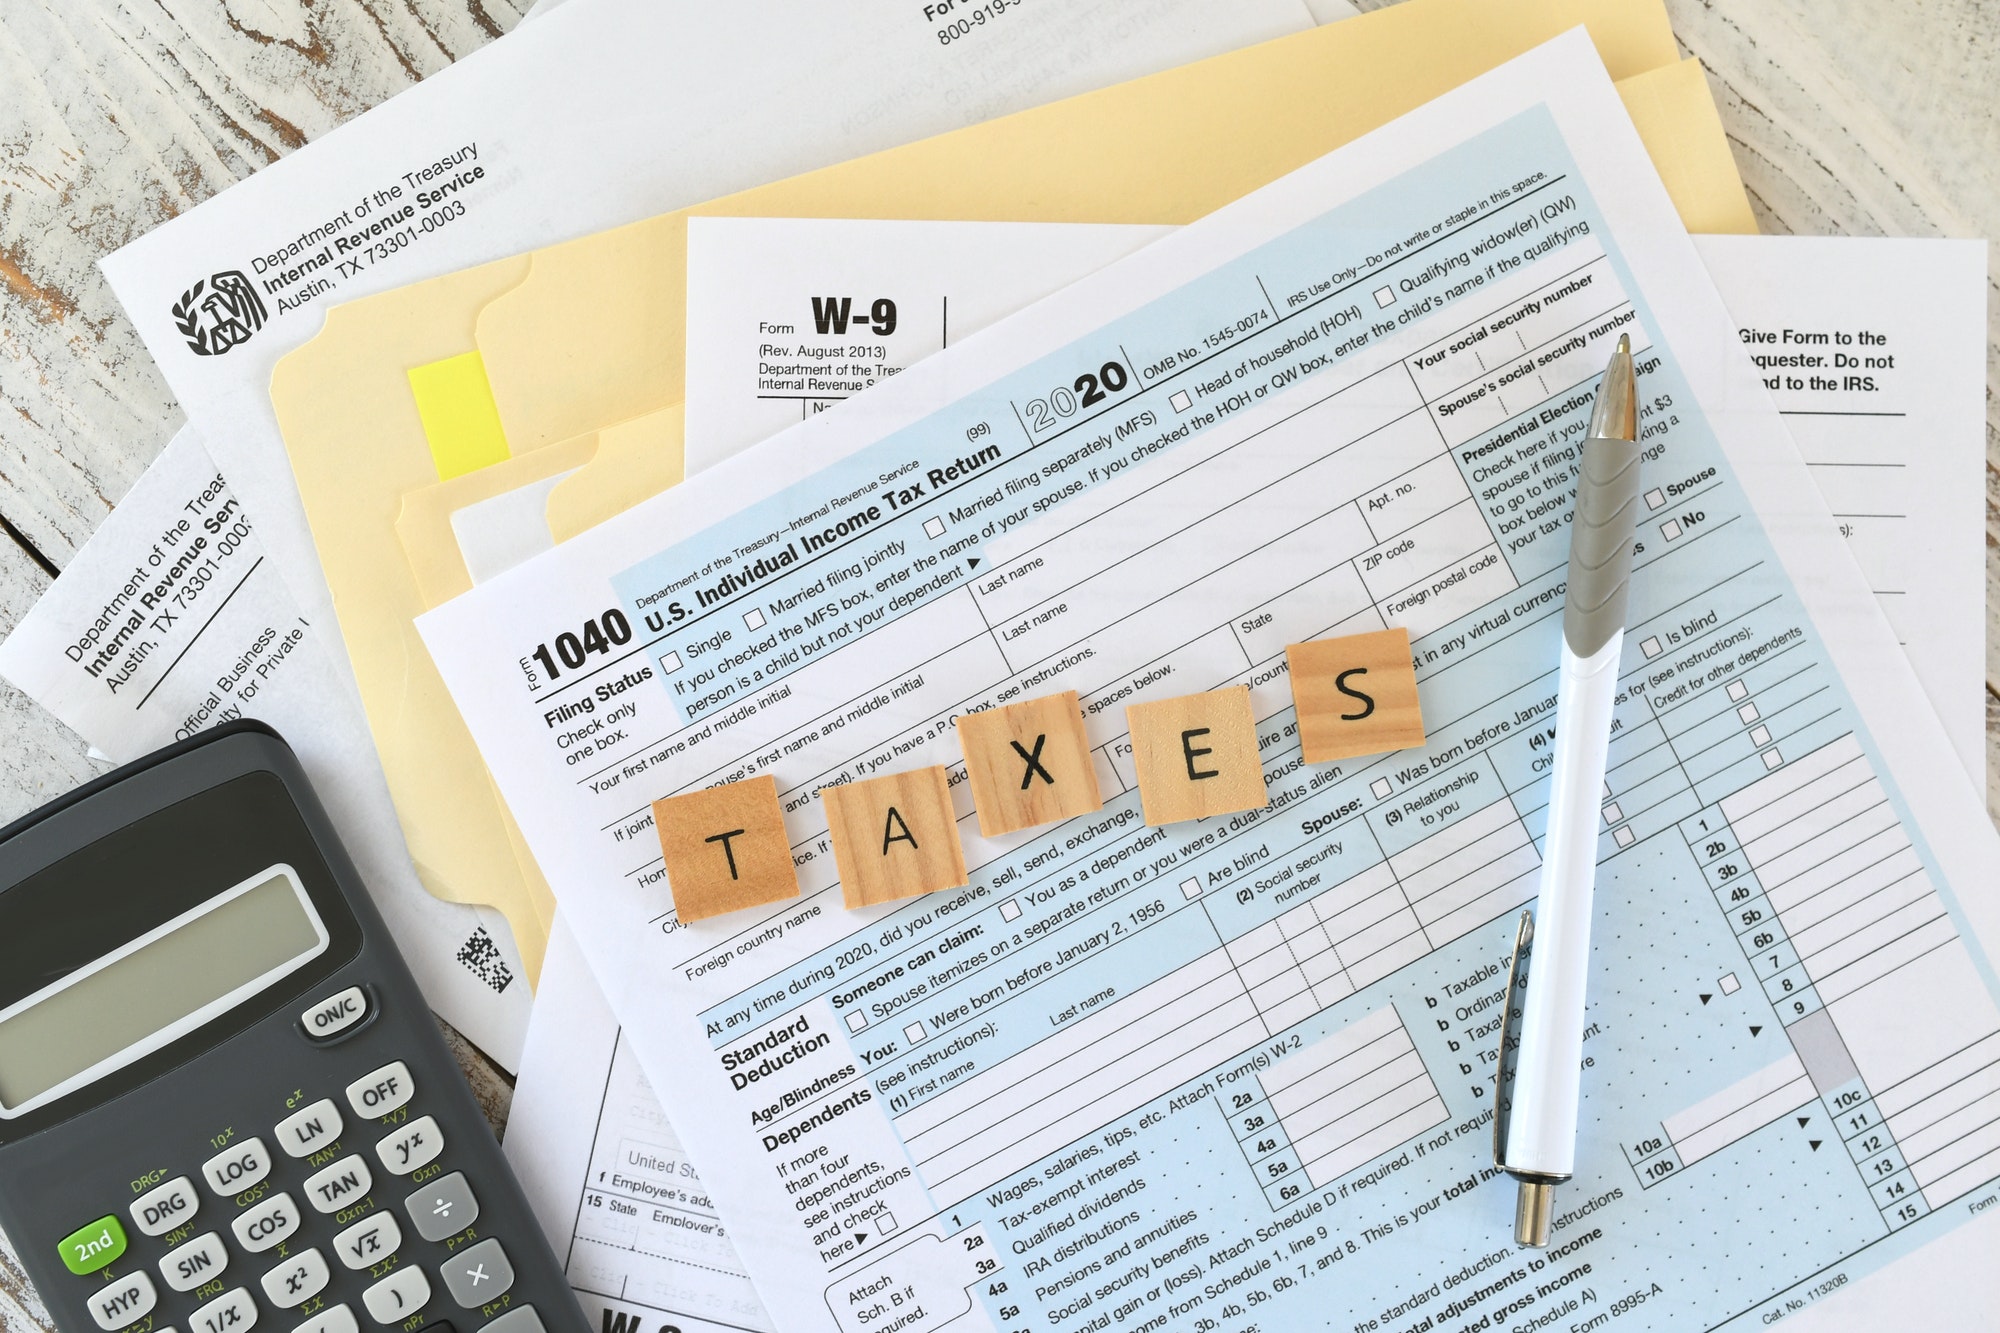 Time to file taxes, income tax forms, IRS filing deadline, paperwork, April 15th, owe, refund